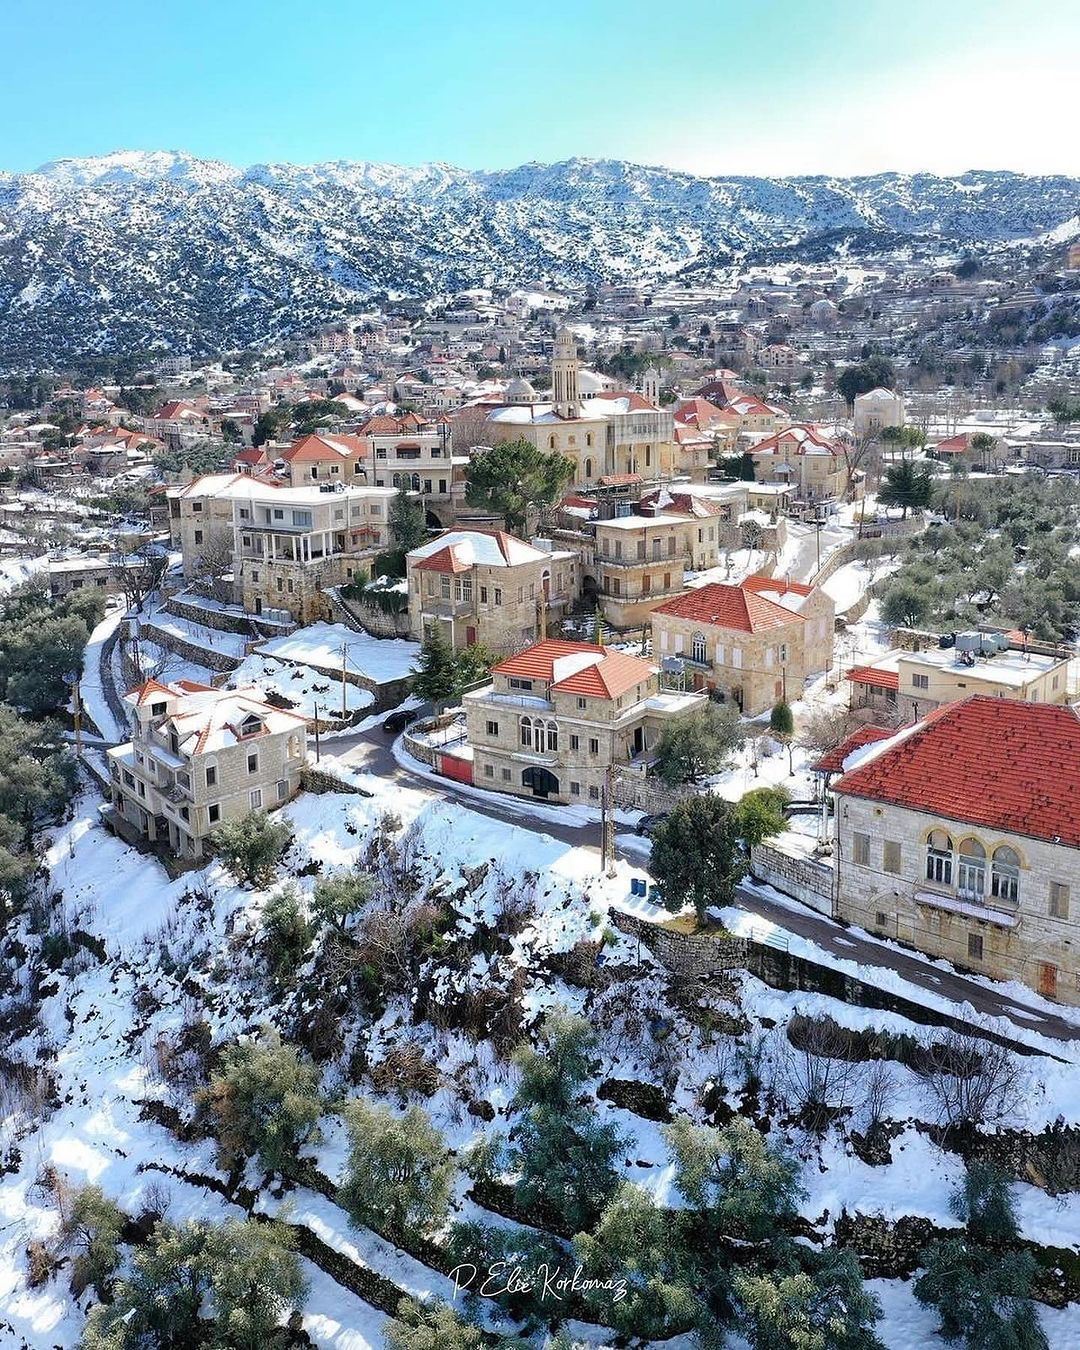 Douma named one of the Best Tourism Villages in the World